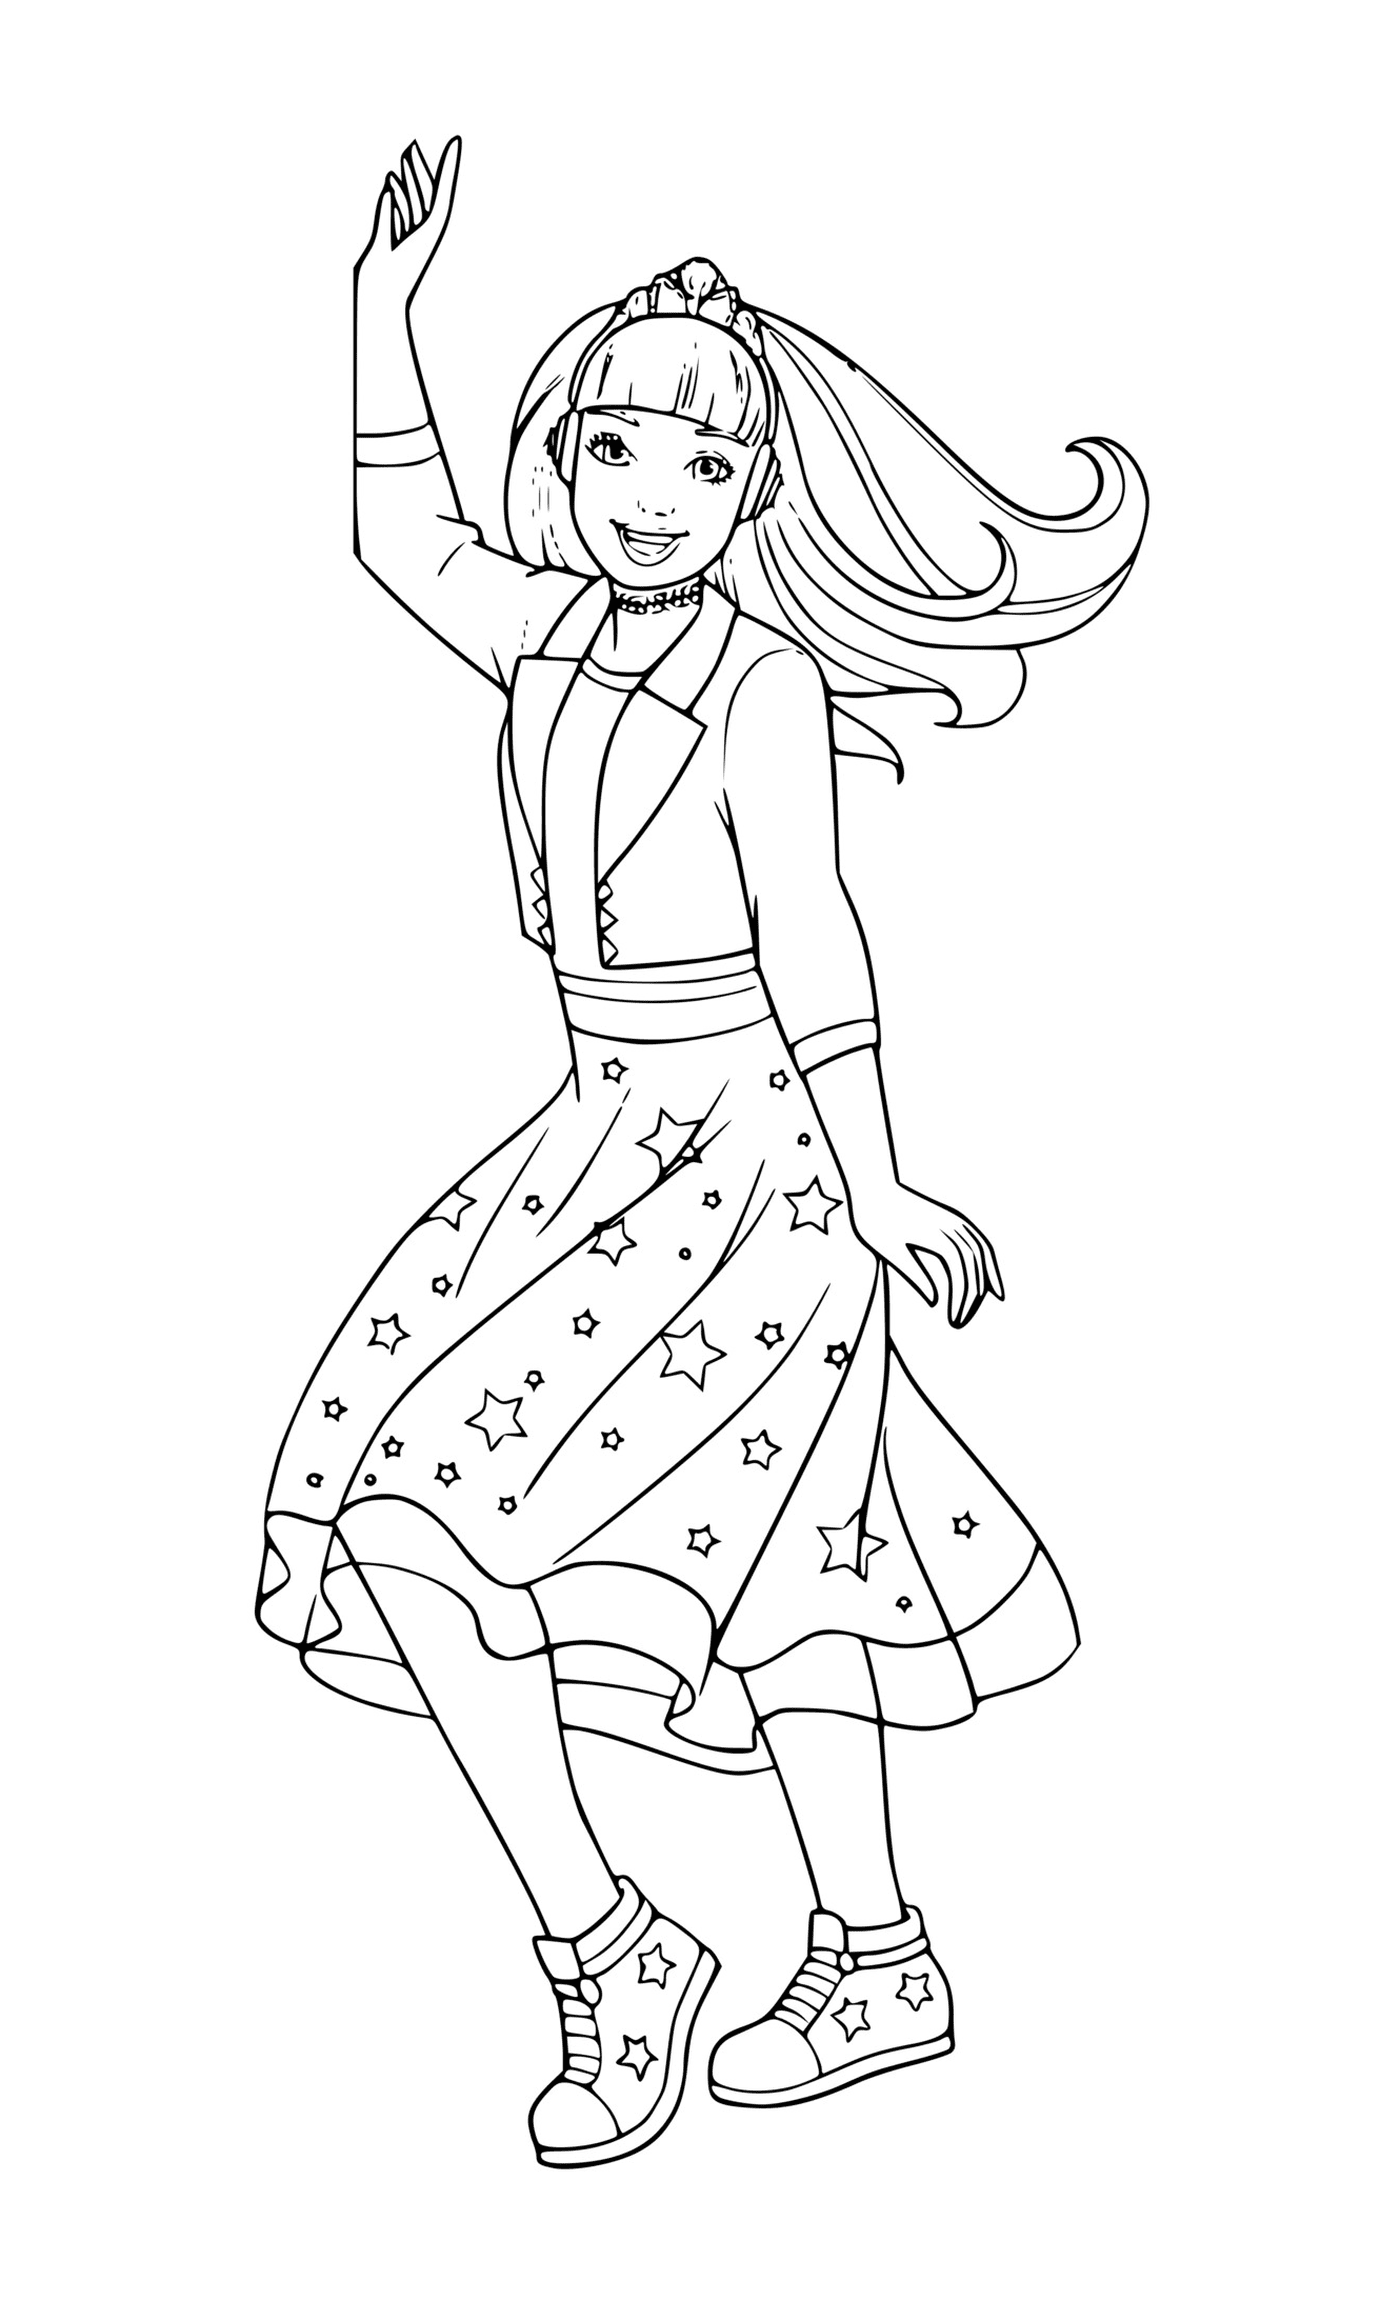  A girl in a starry dress dancing 